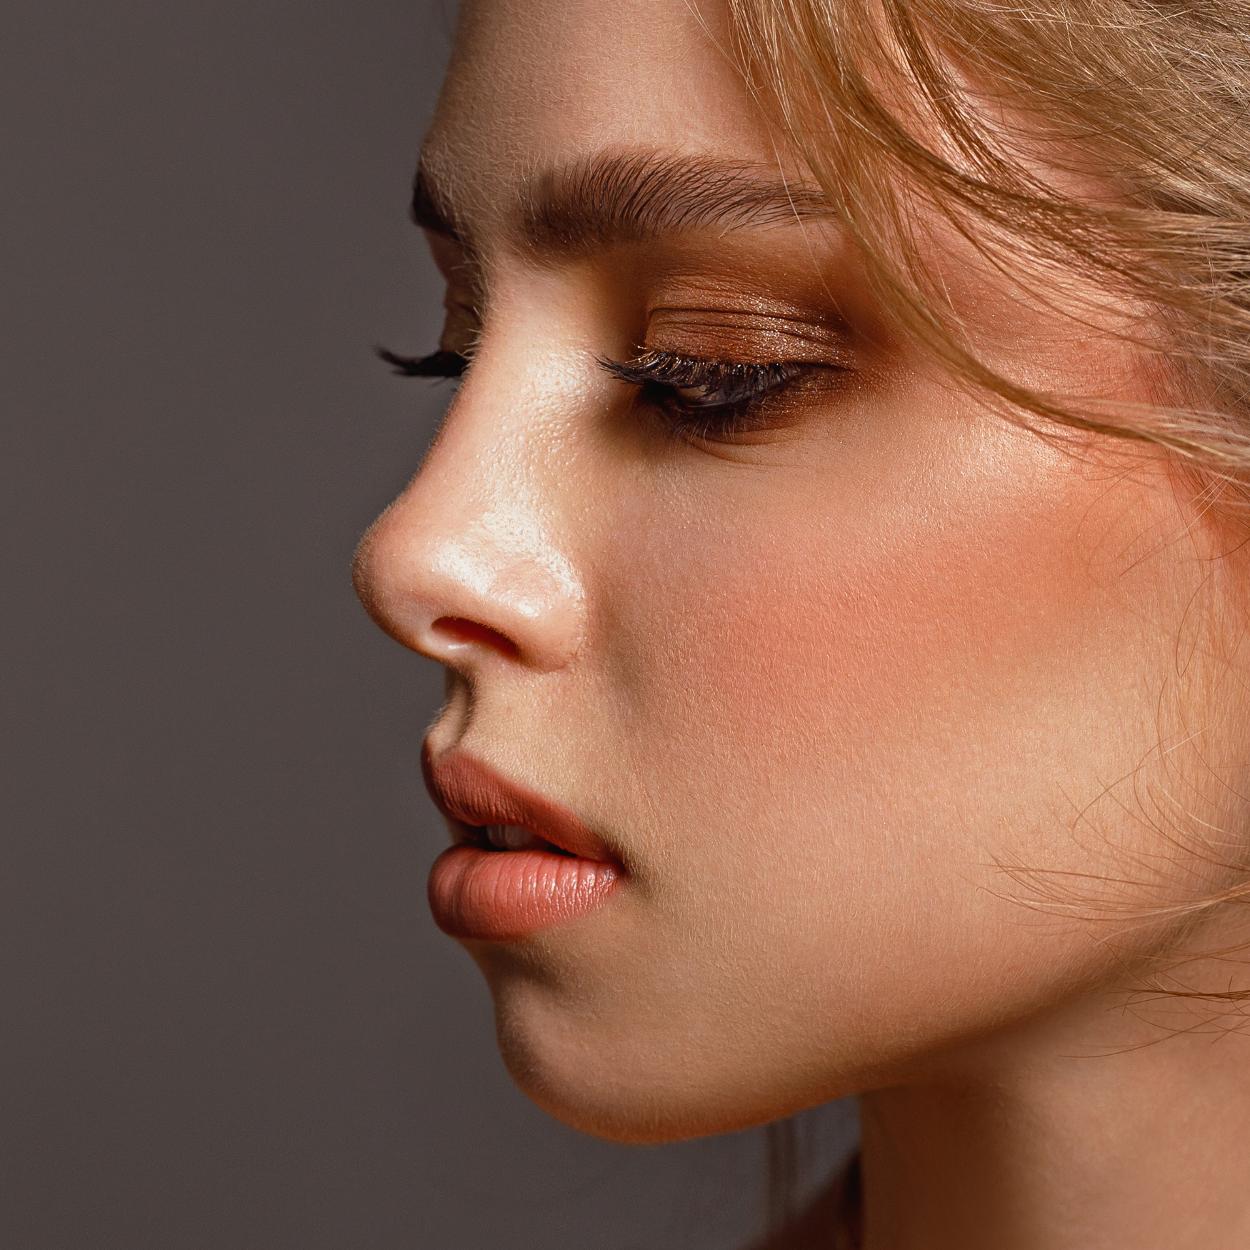 Non-surgical rhinoplasty results